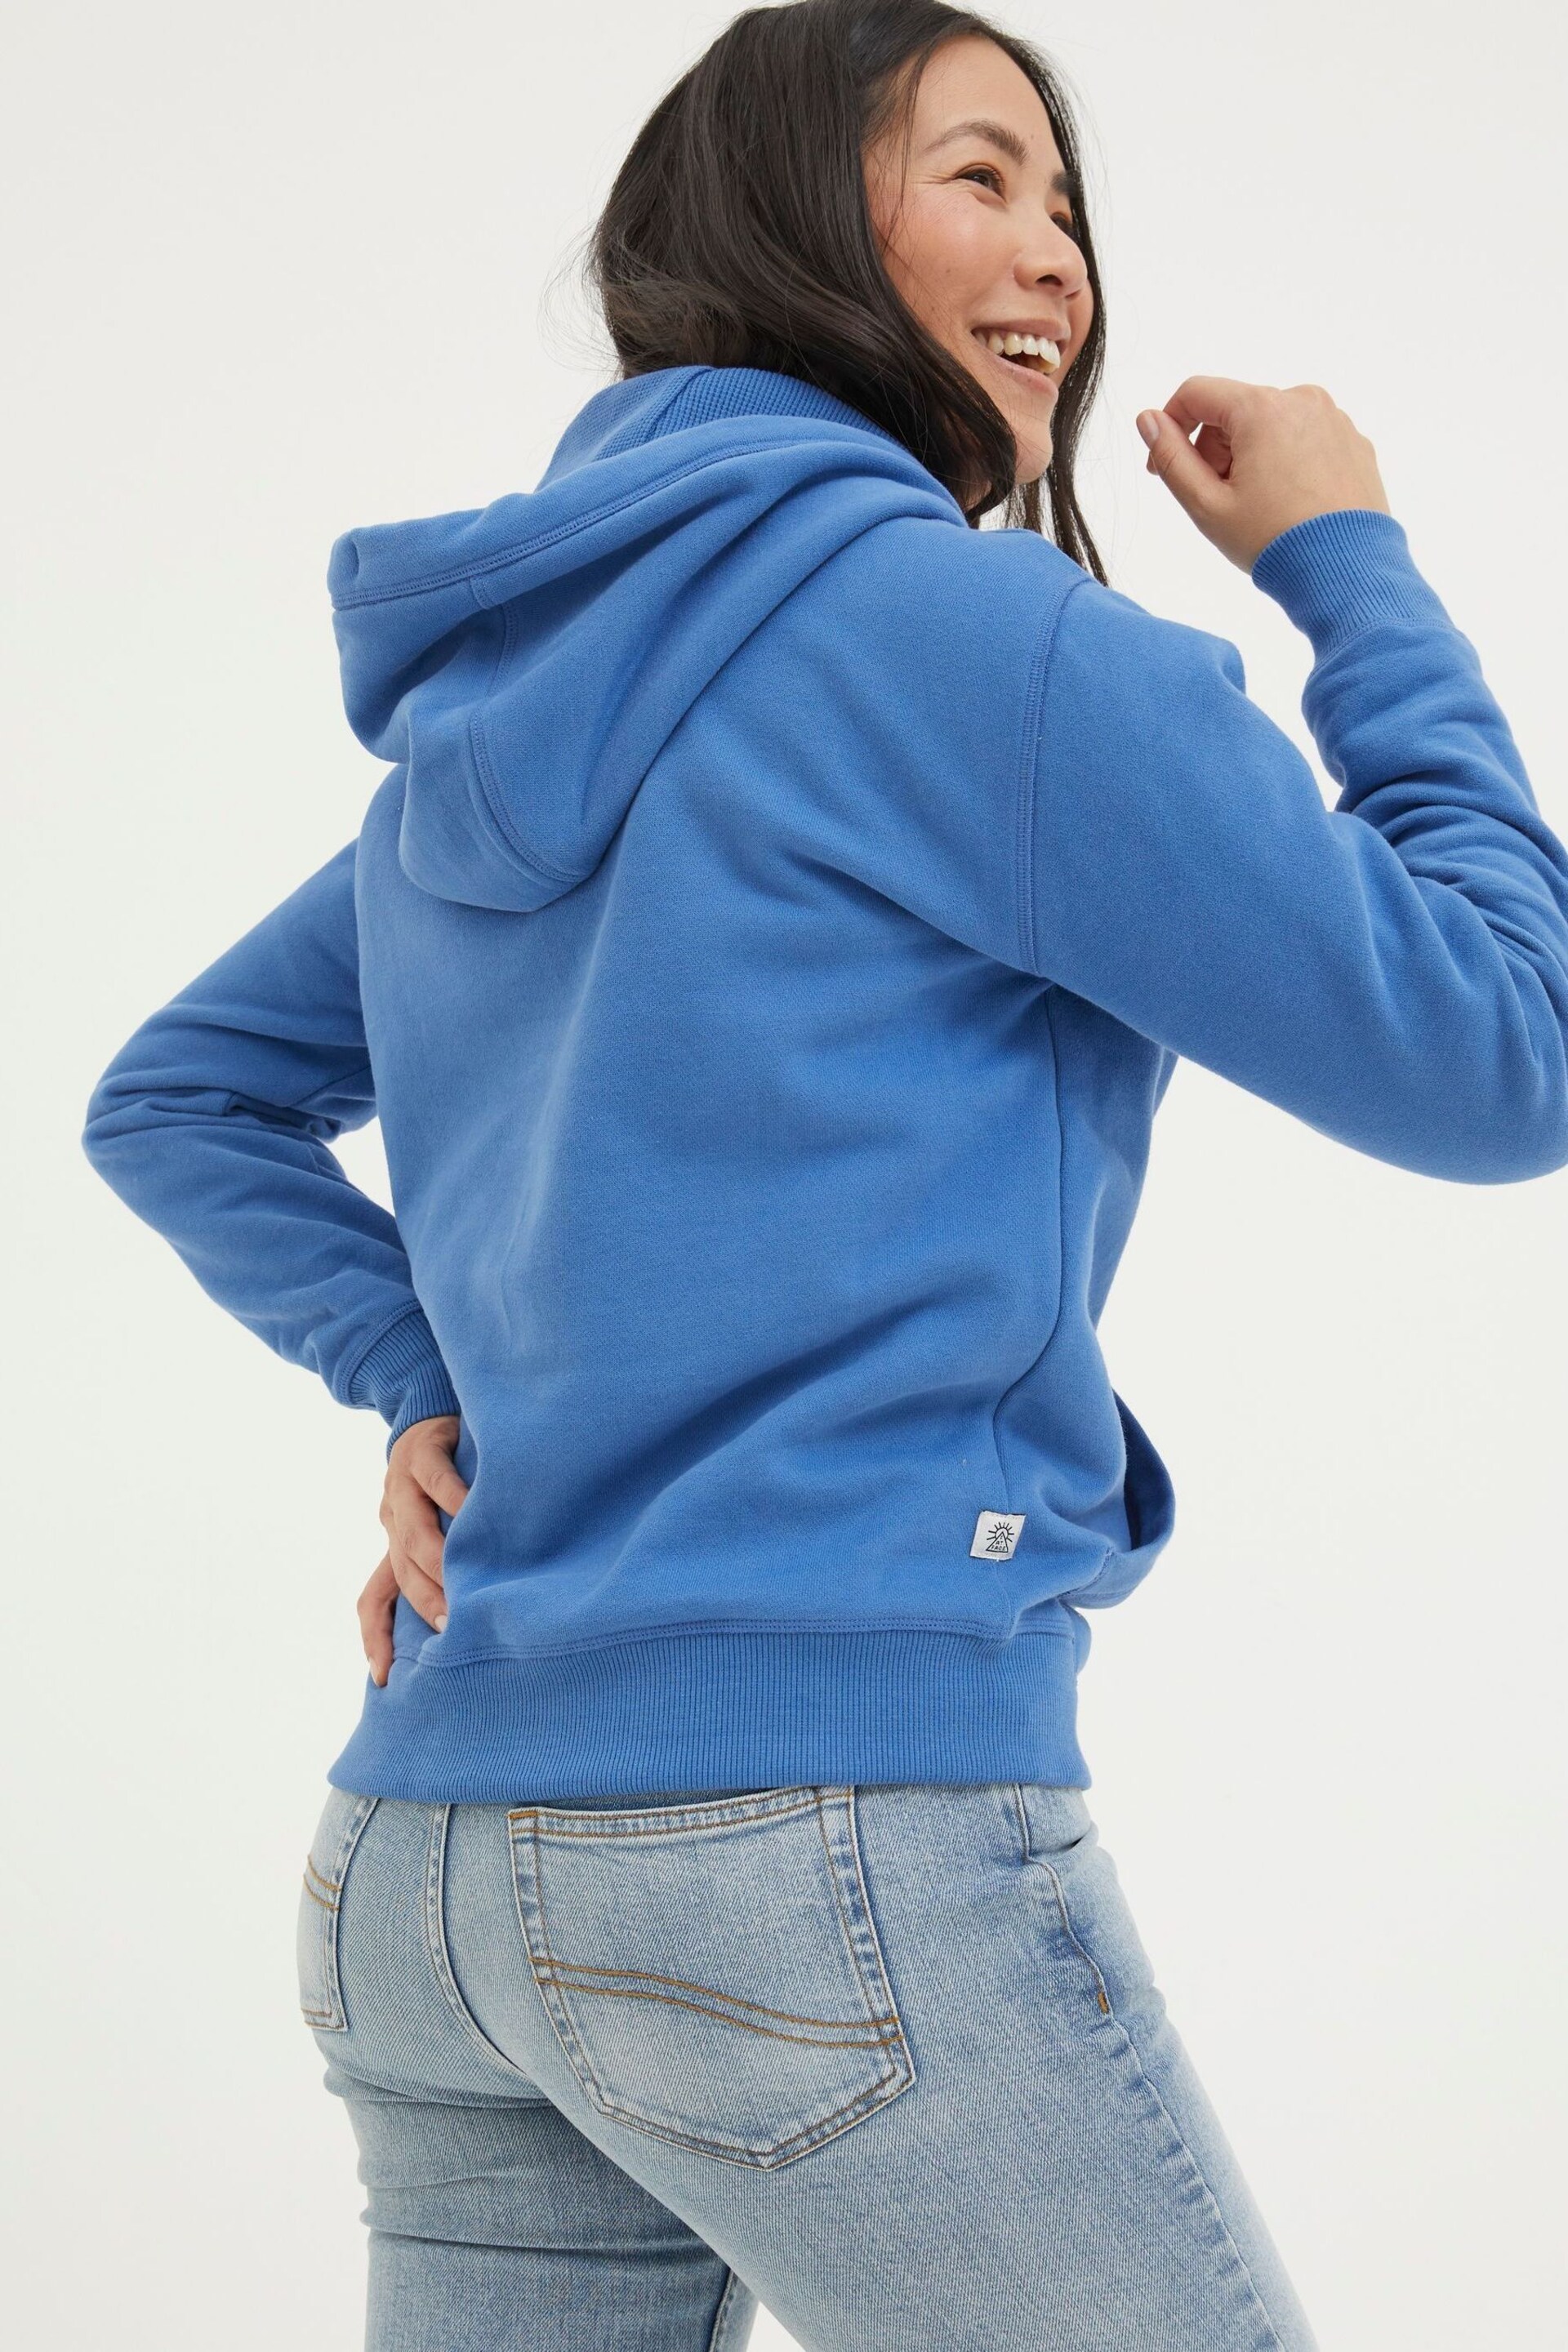 FatFace Blue Izzy Overhead Hoodie - Image 2 of 4